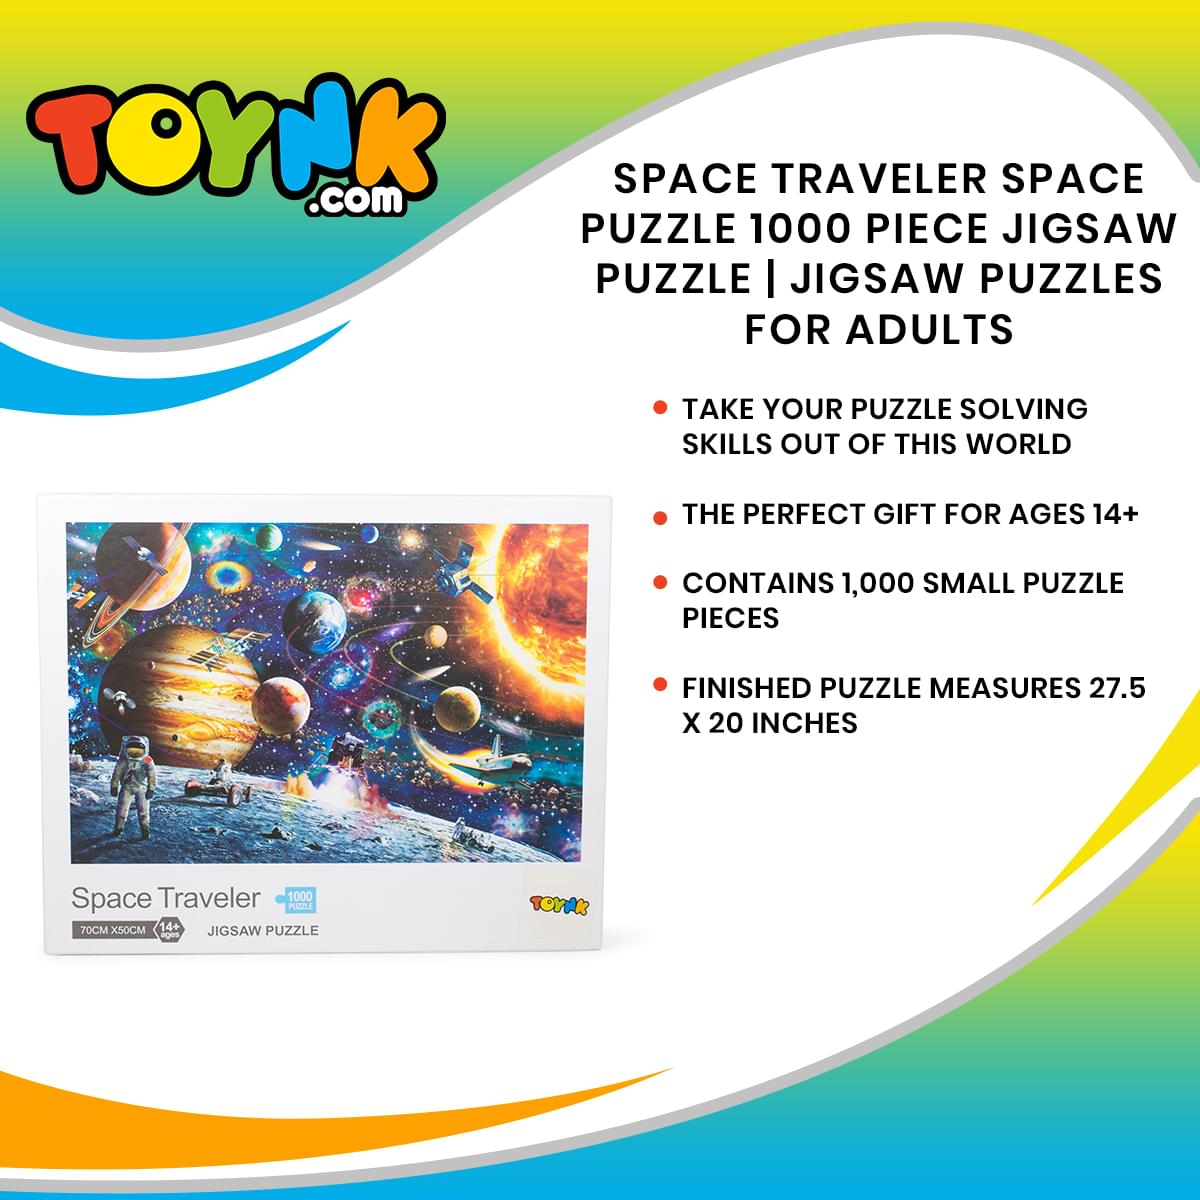 Space Traveler Space Puzzle 1000 Piece Jigsaw Puzzle | Jigsaw Puzzles For Adults